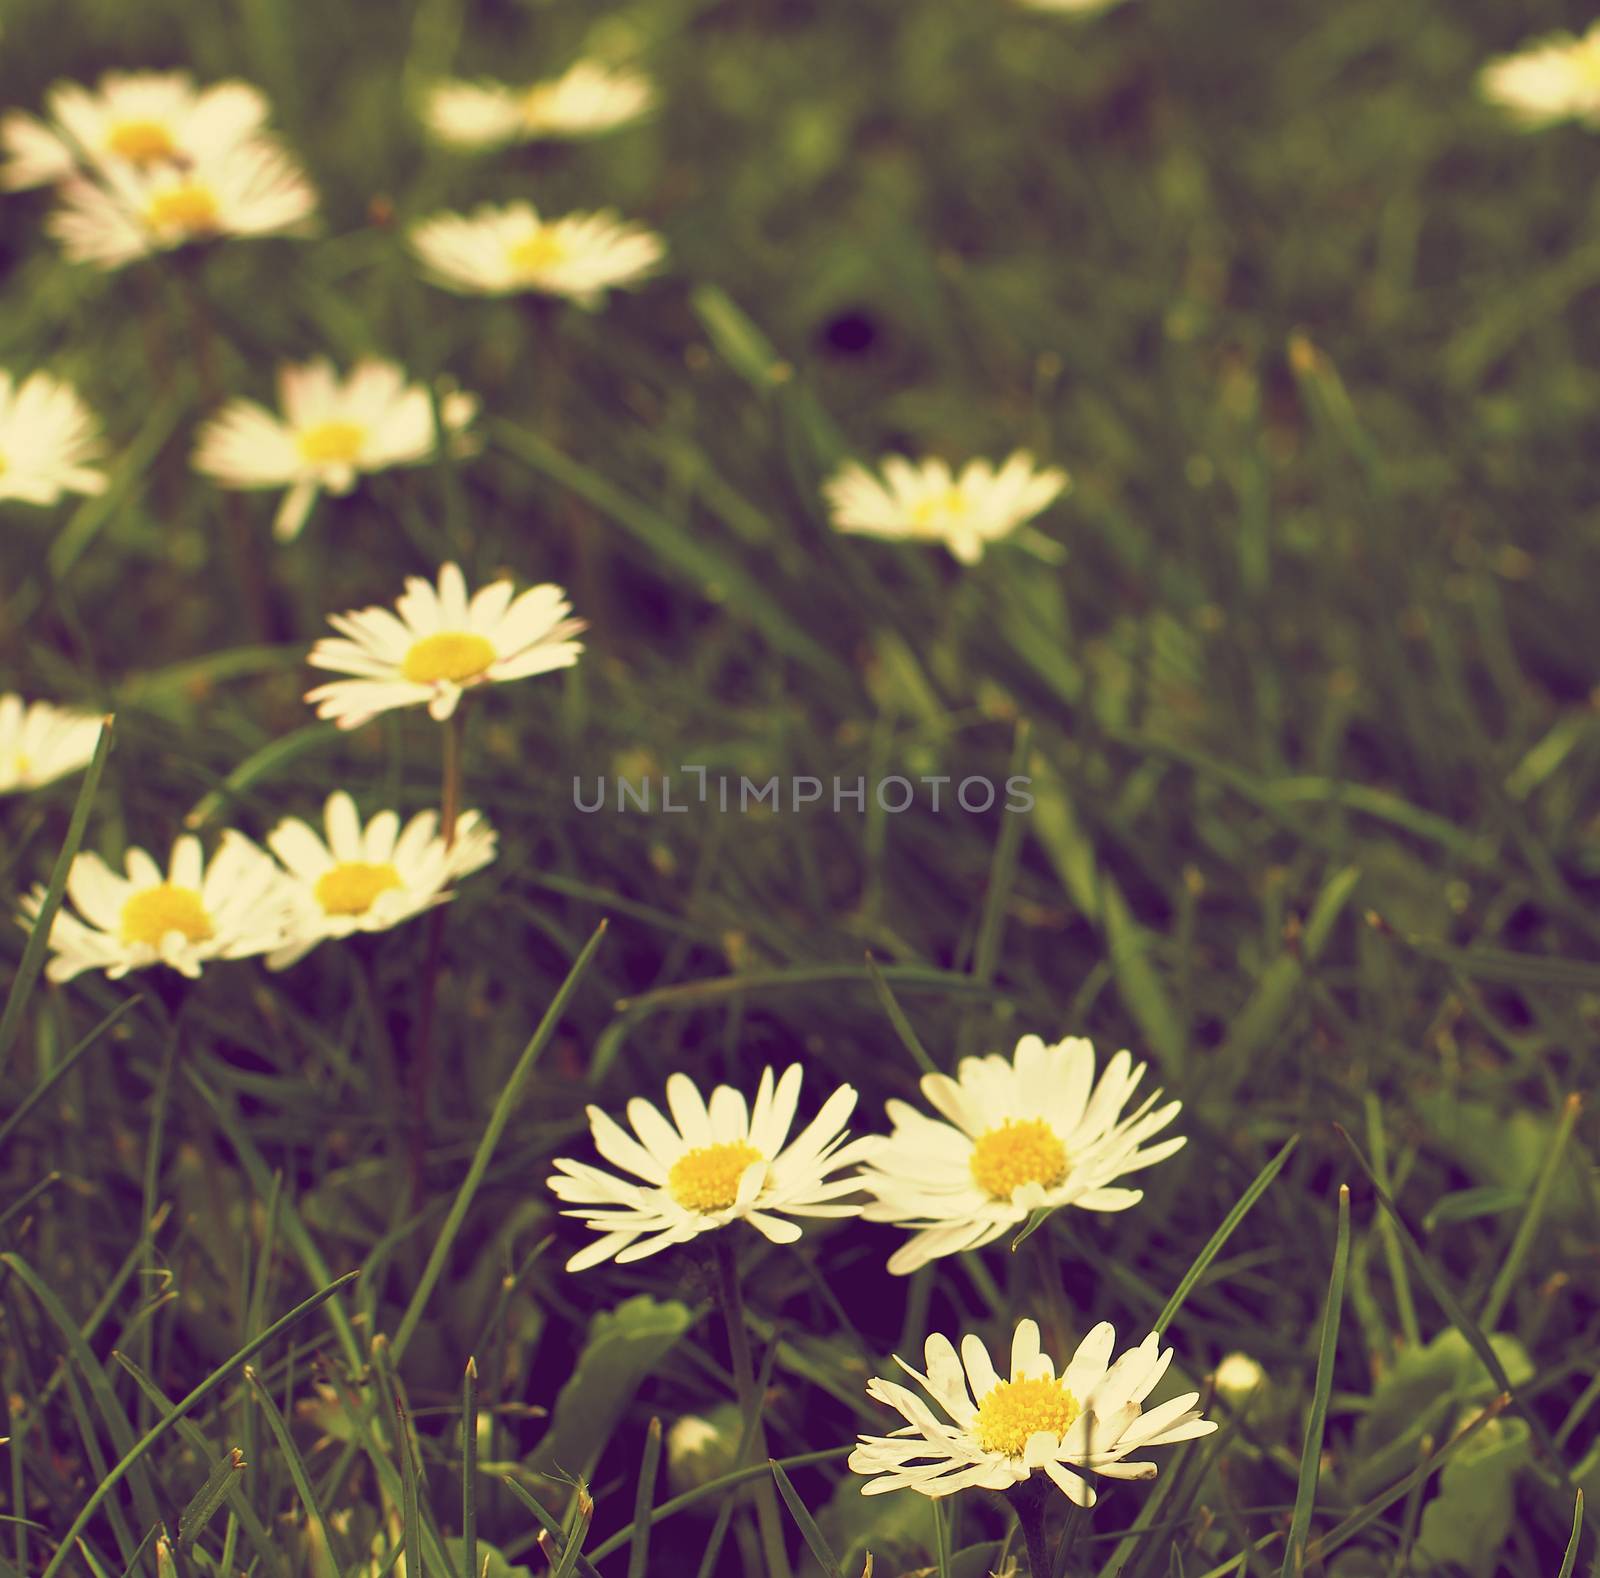 Retro Styled Flowers and Green Grass Field with Fragile Little Camomiles Outdoors. Focus on Foreground